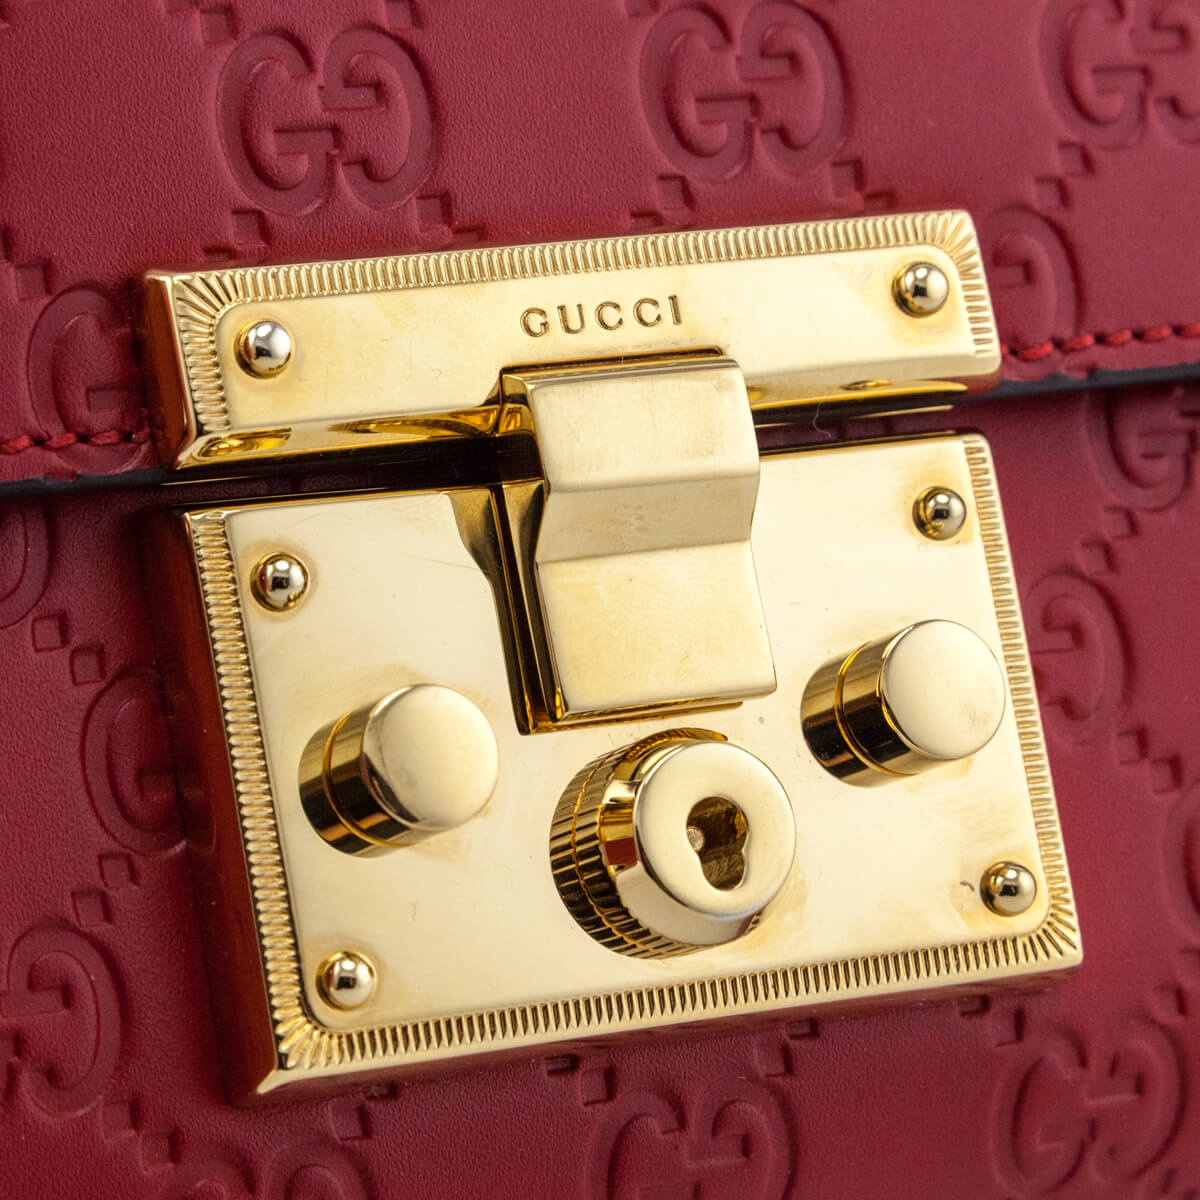 Gucci Red Guccissima Small PadLock Shoulder Bag - Love that Bag etc - Preowned Authentic Designer Handbags & Preloved Fashions